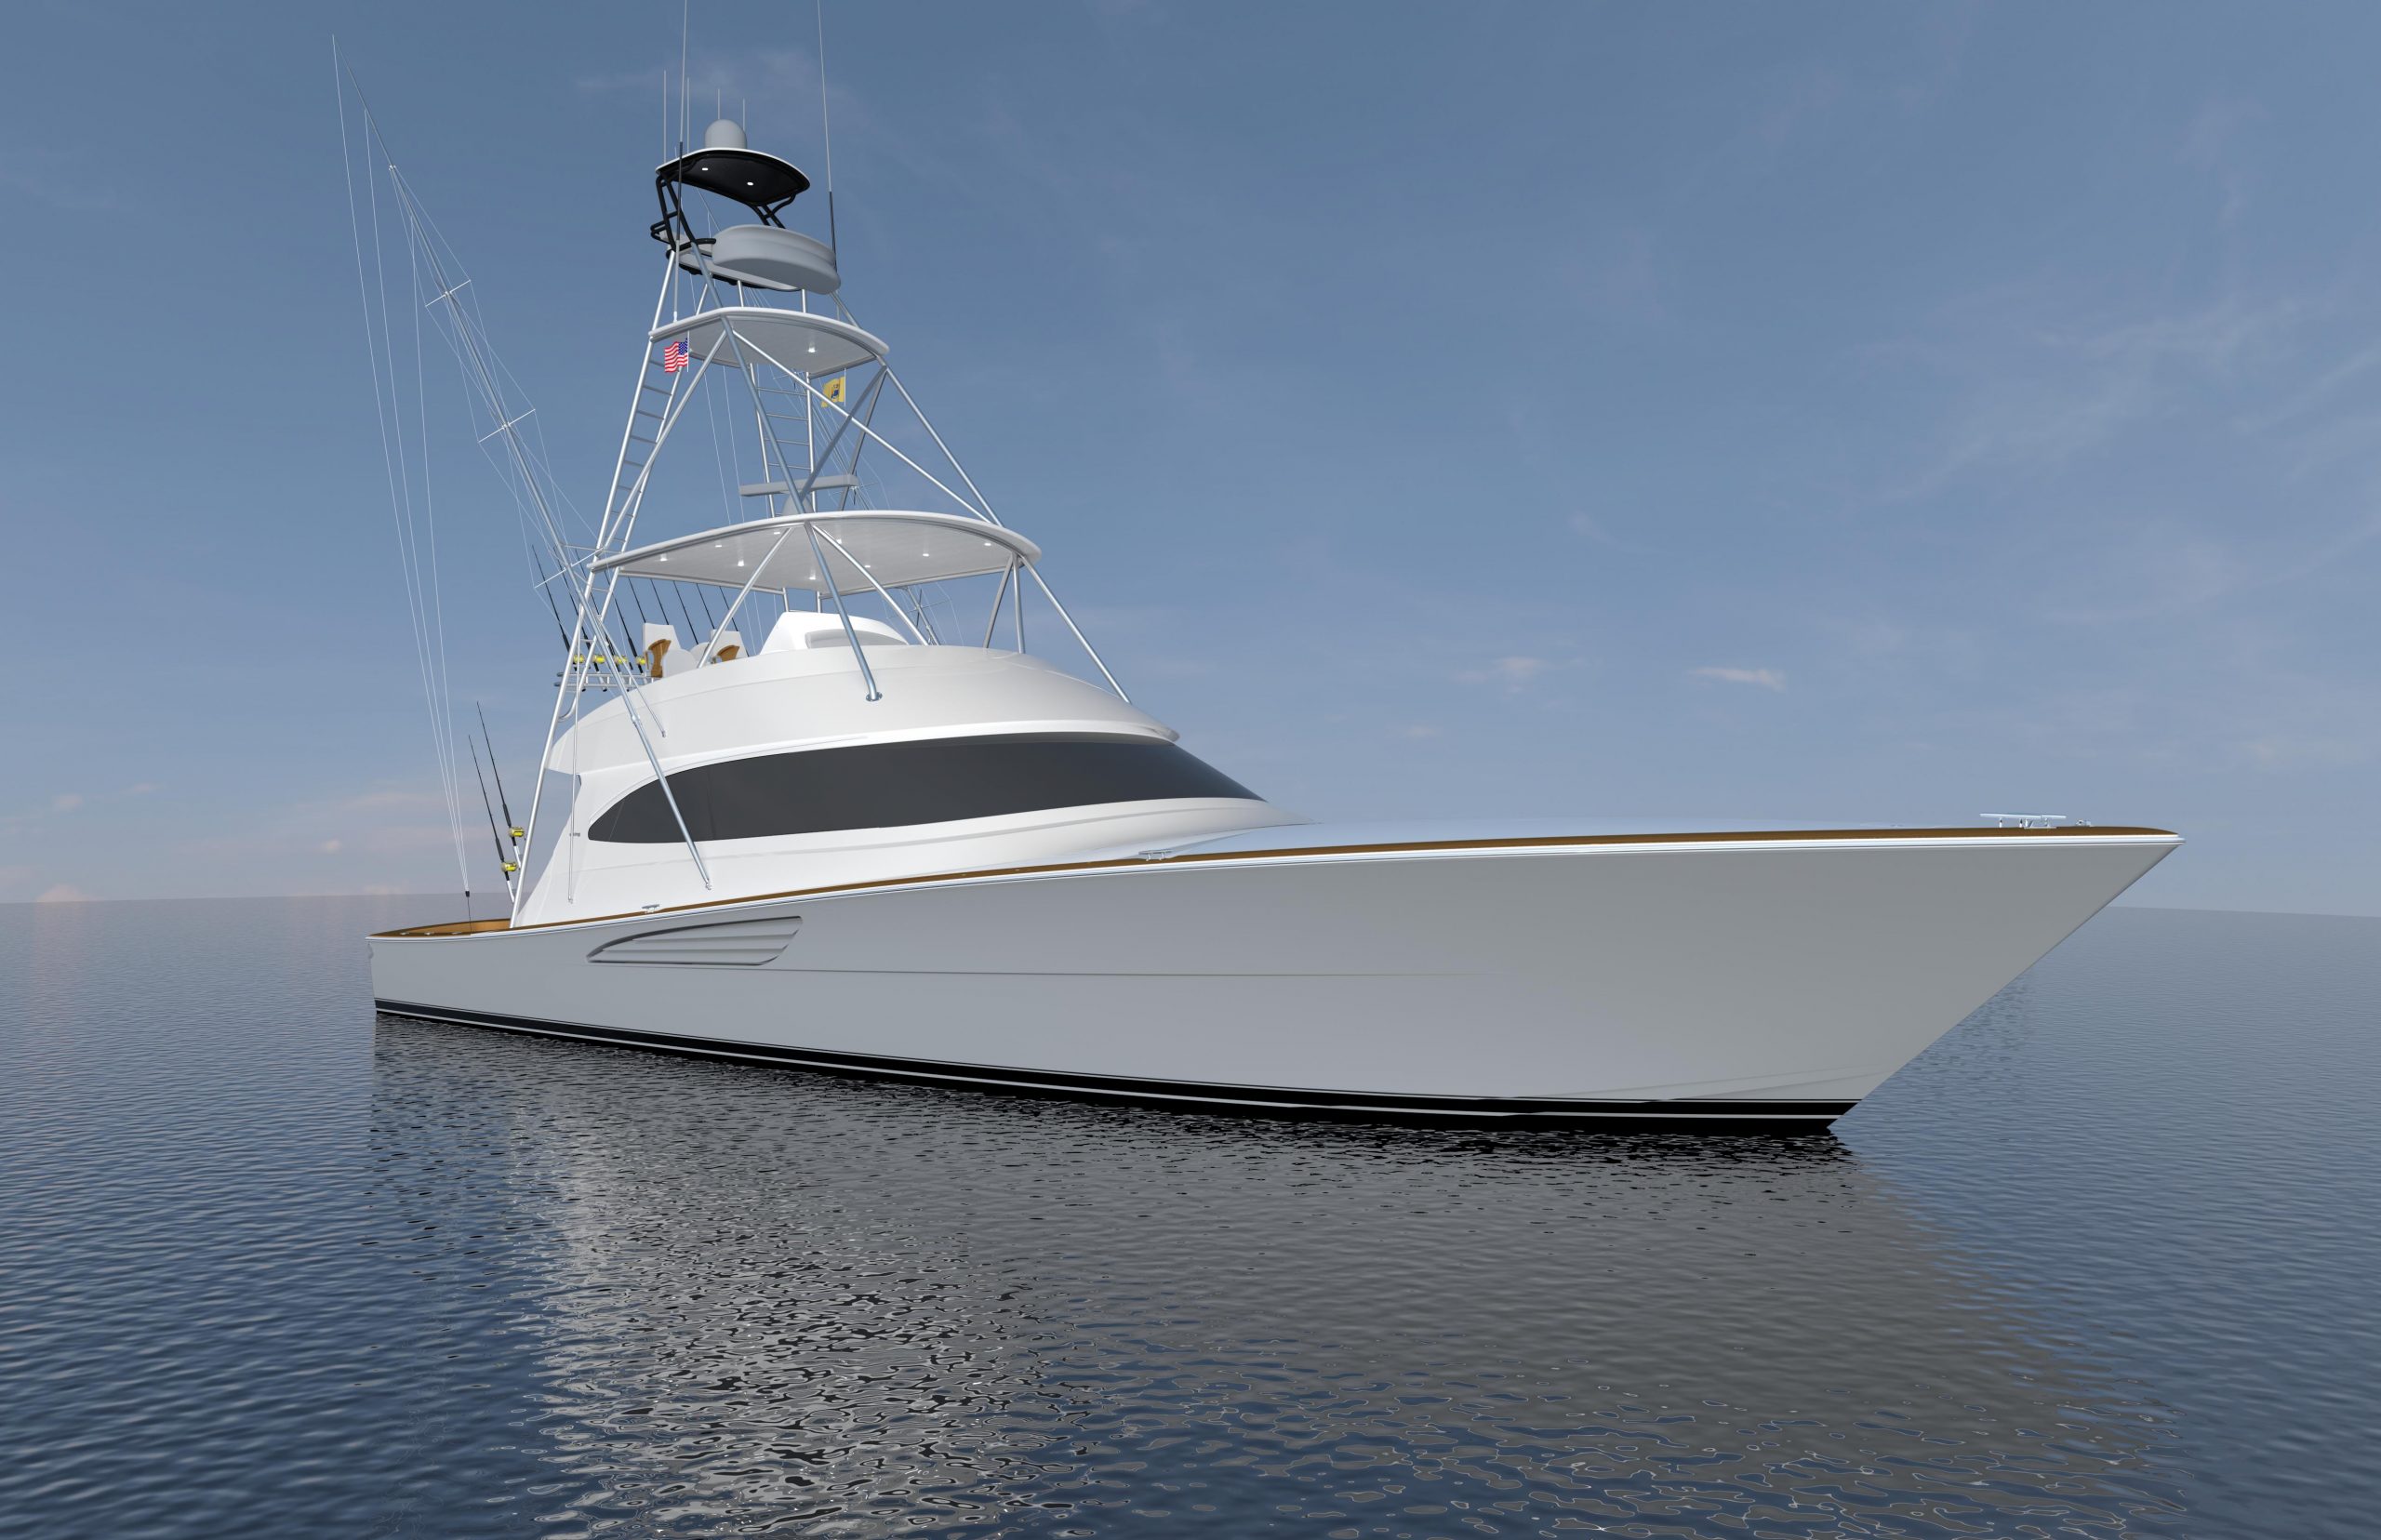 Best Offshore Fishing Boats For 2022